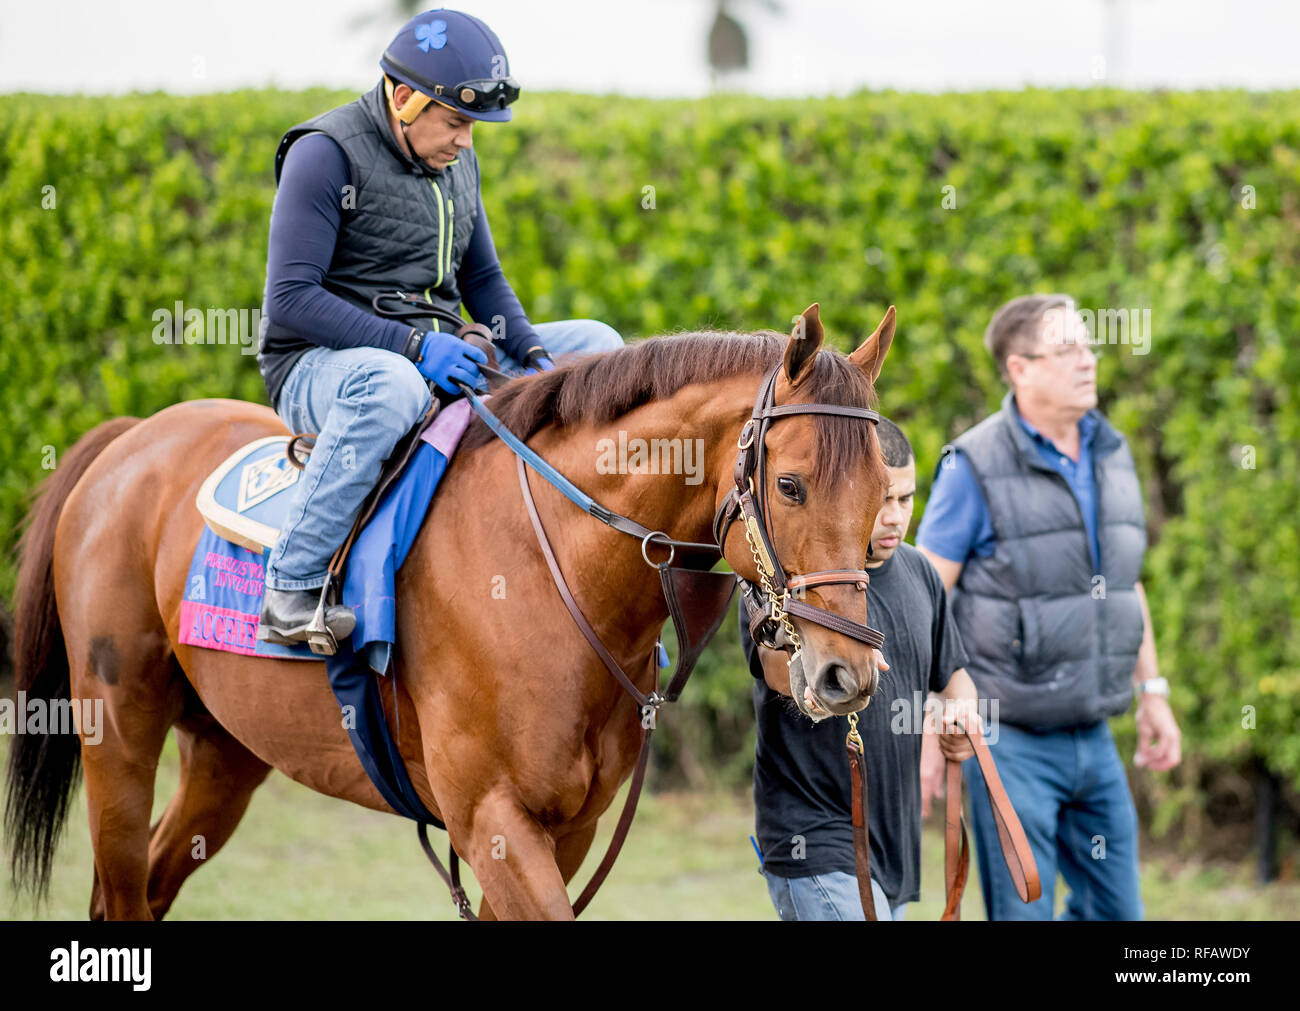 Hallandale Beach, Florida, USA. 24th Jan, 2019. January 24, 2019: Accelerate walks to the track with Trainer John Sadler to exercise in preparation for the Pegasus World Cup Invitational on January 24, 2019 at Gulfstream Park in Hallandale Beach, Florida. Scott Serio/Eclipse Sportswire/CSM/Alamy Live News Stock Photo